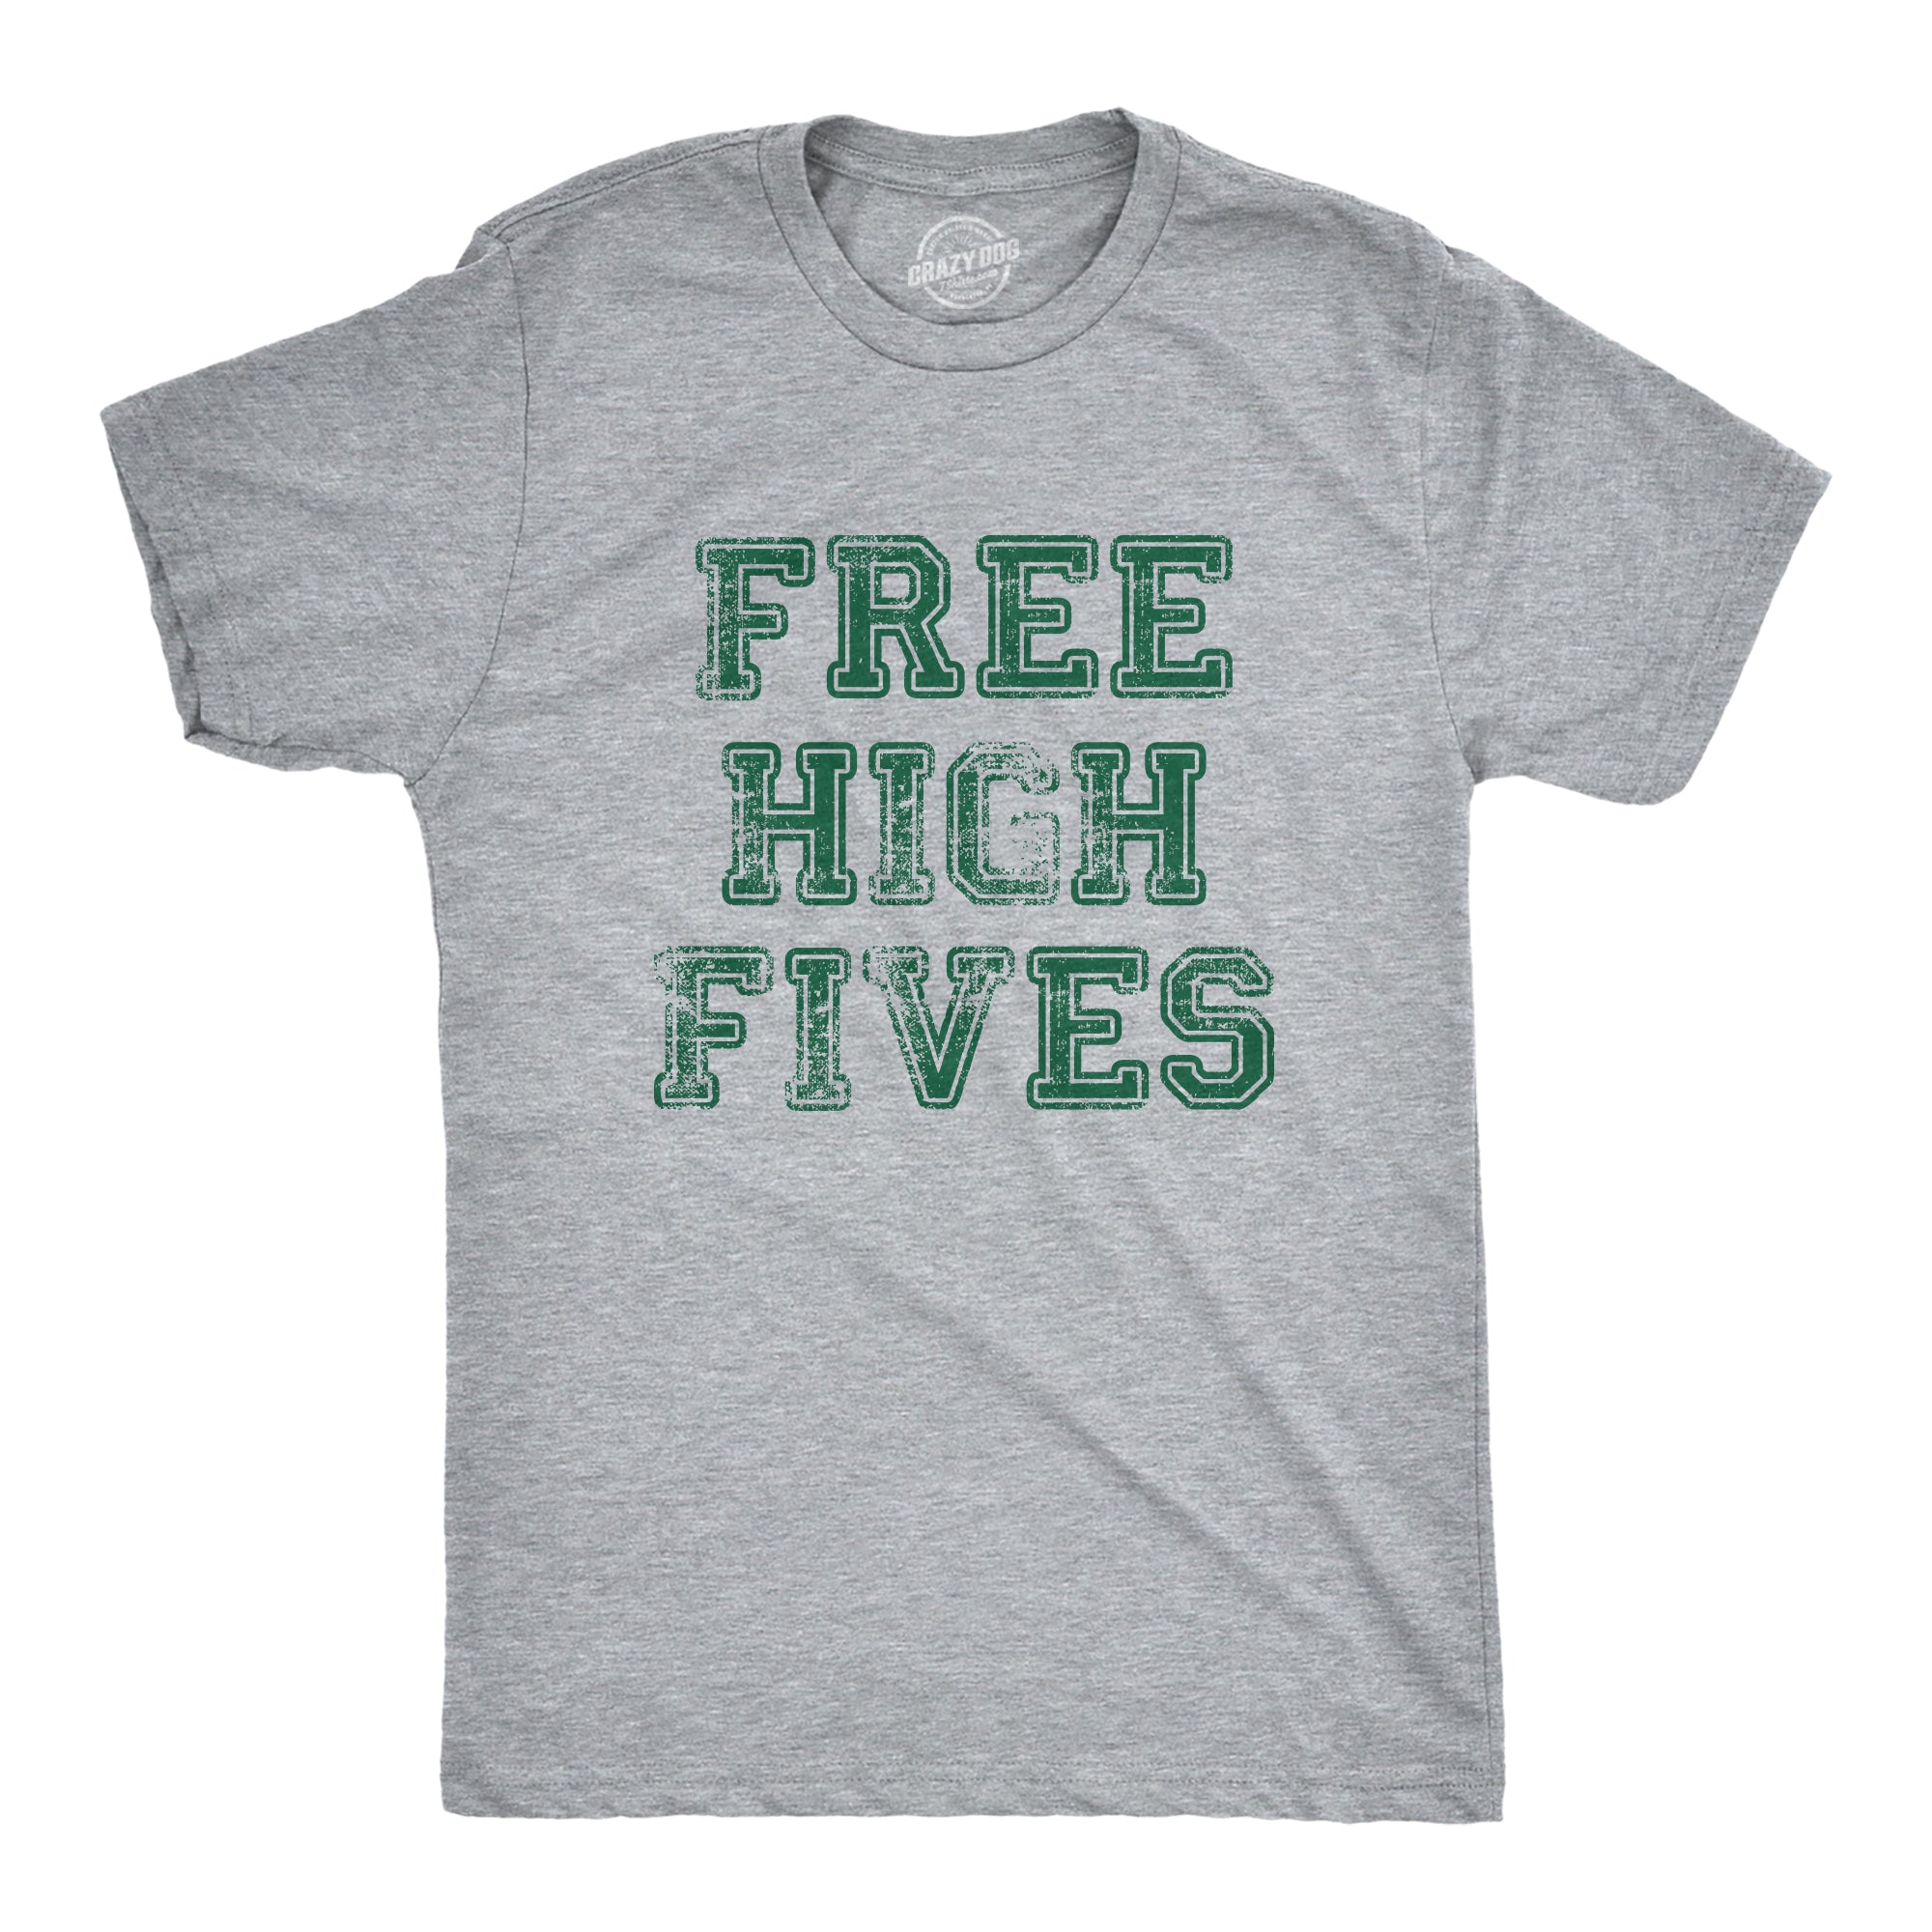 Funny Light Heather Grey - High Fives Free High Fives Mens T Shirt Nerdy Sarcastic Sarcastic Tee